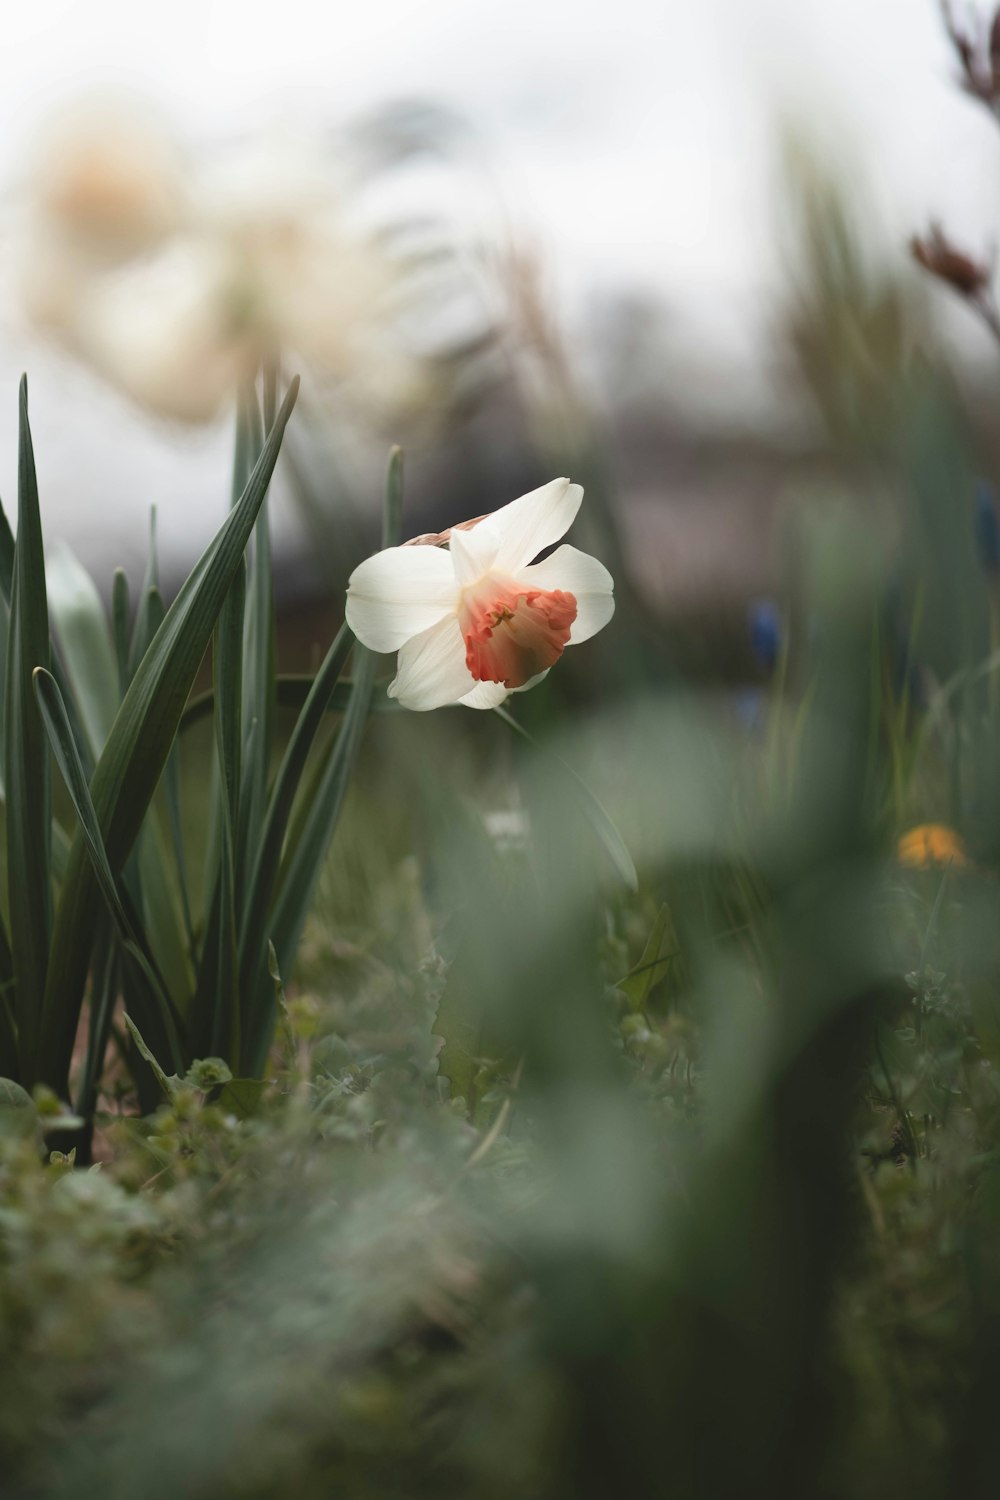 a single white flower with a red center